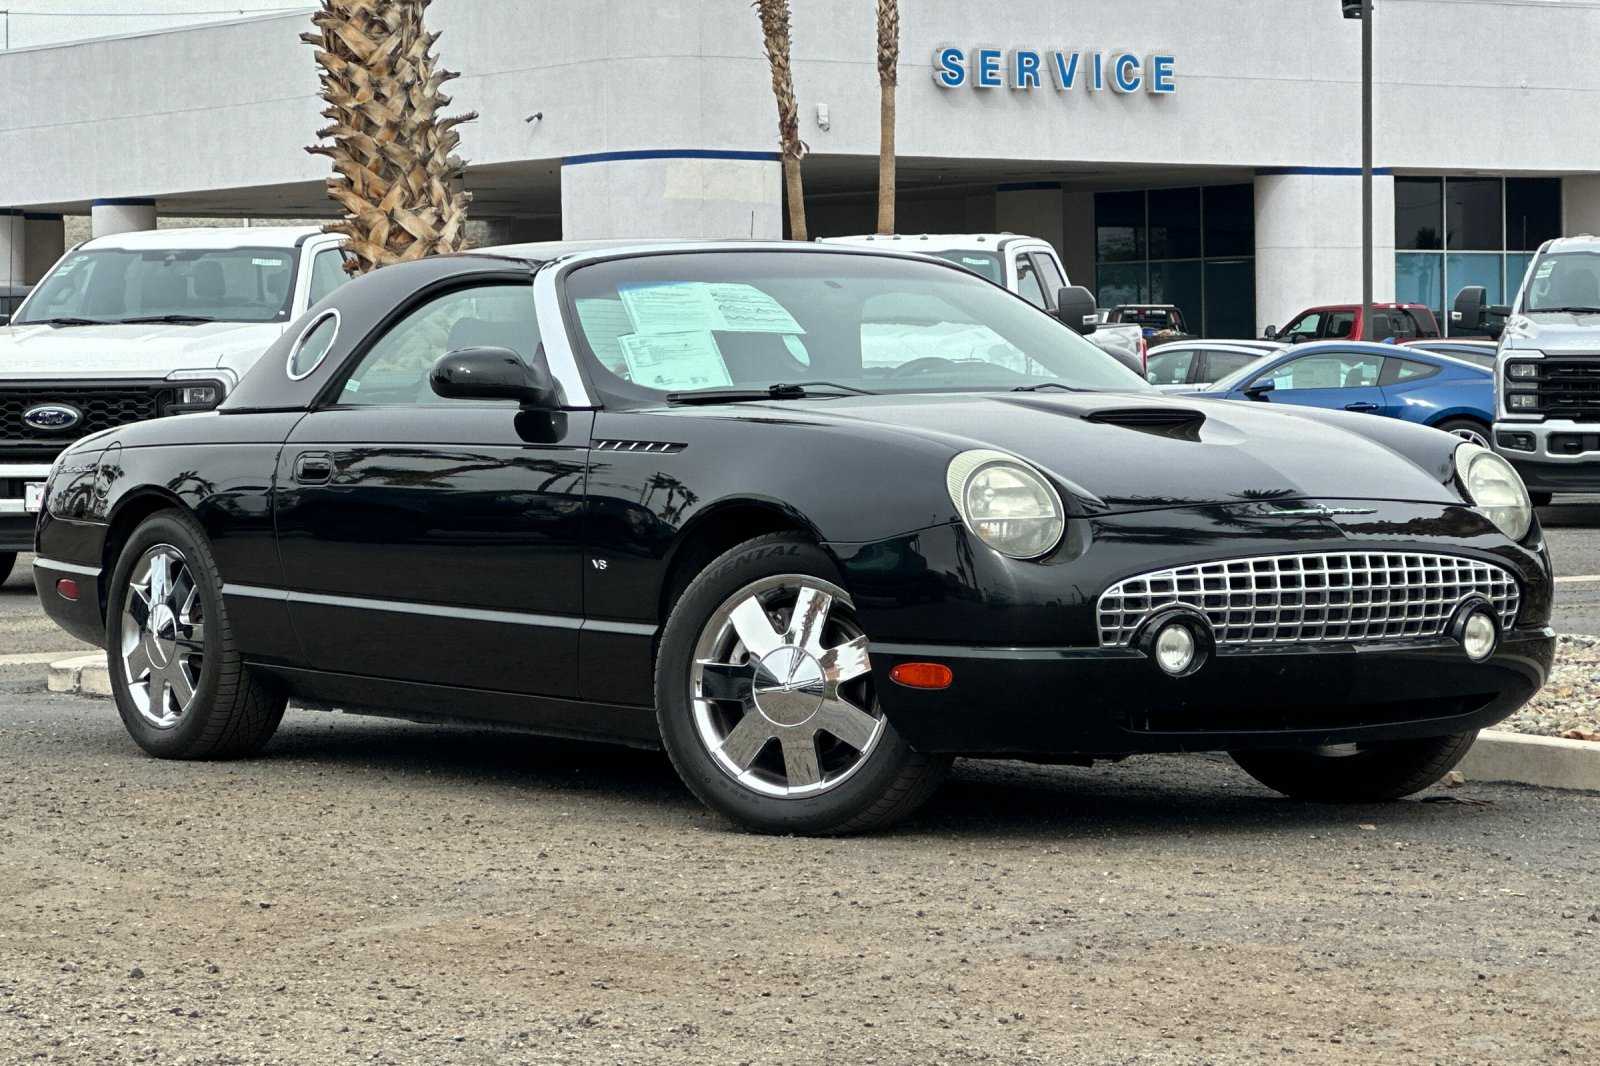 Used 2002 Ford Thunderbird Deluxe with VIN 1FAHP60A82Y115241 for sale in Imperial, CA